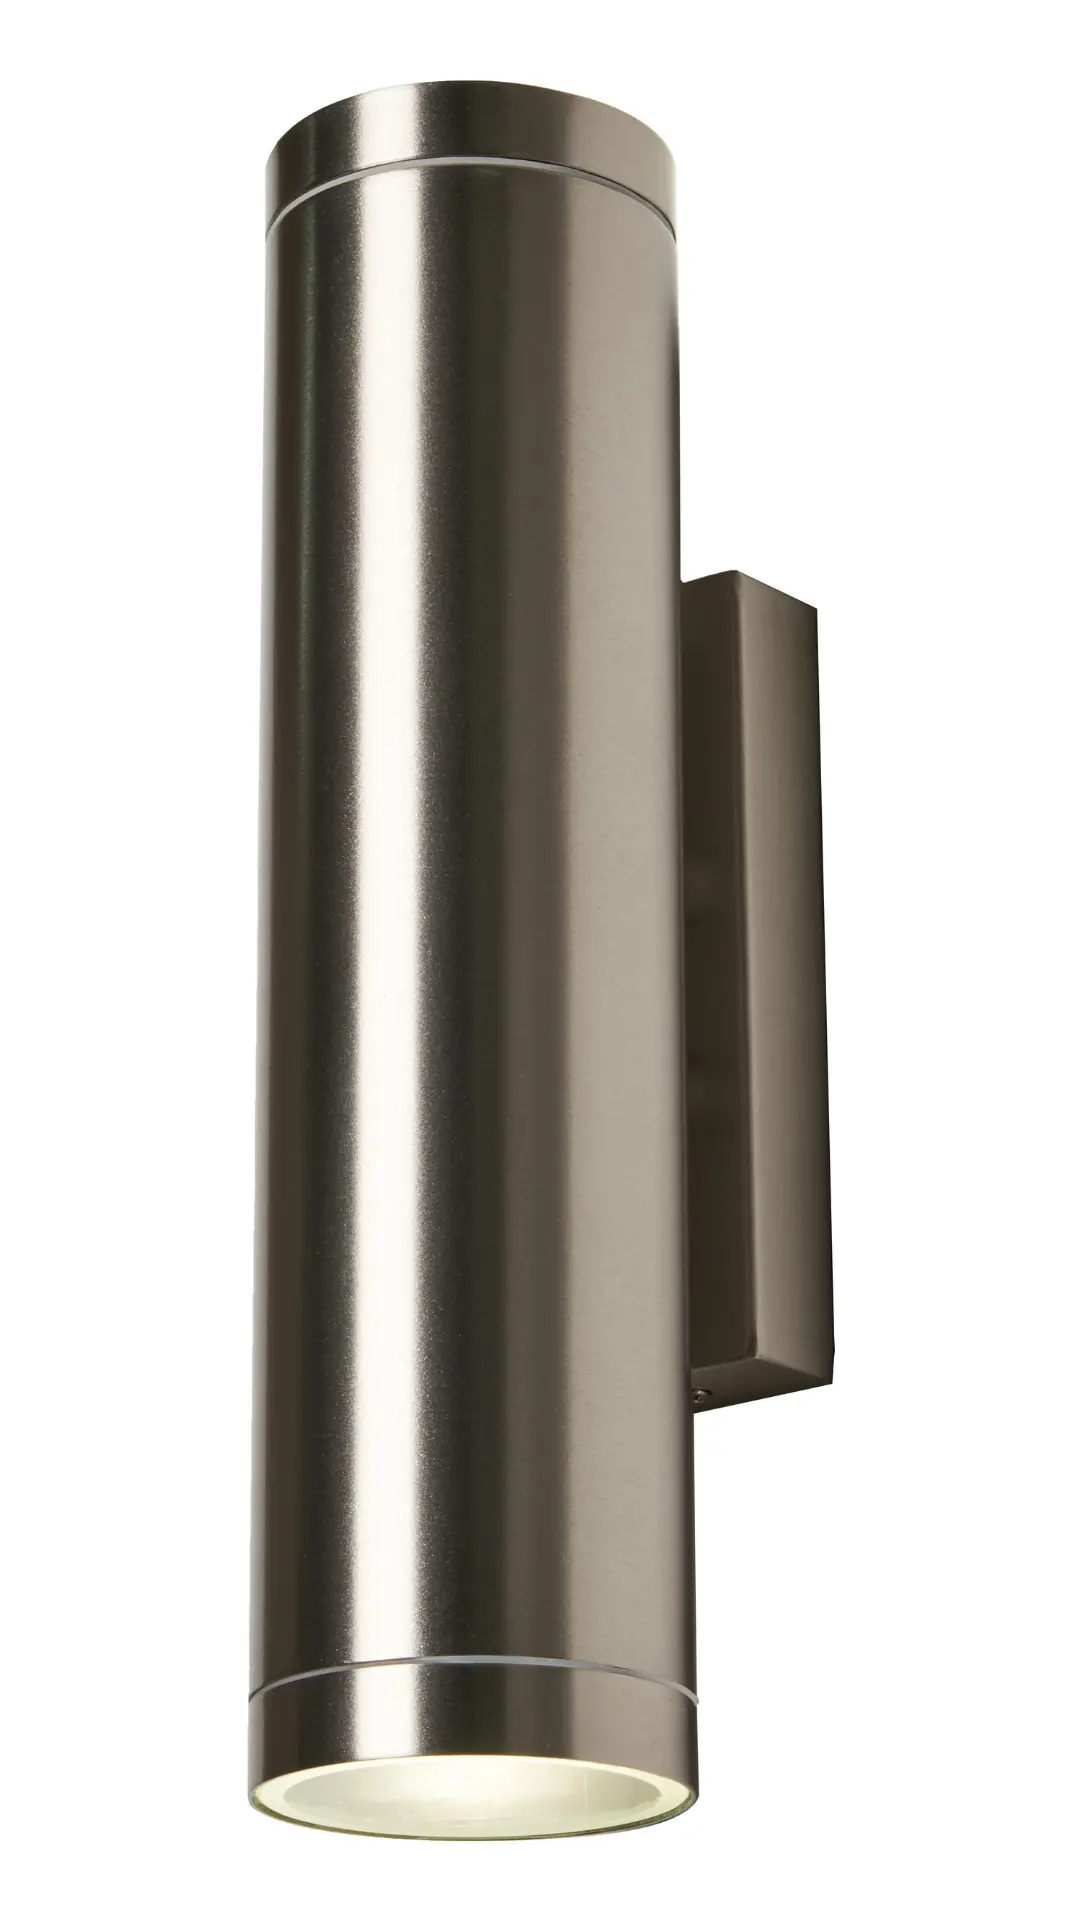 Brean Up & Down Wall Light in Stainless Steel